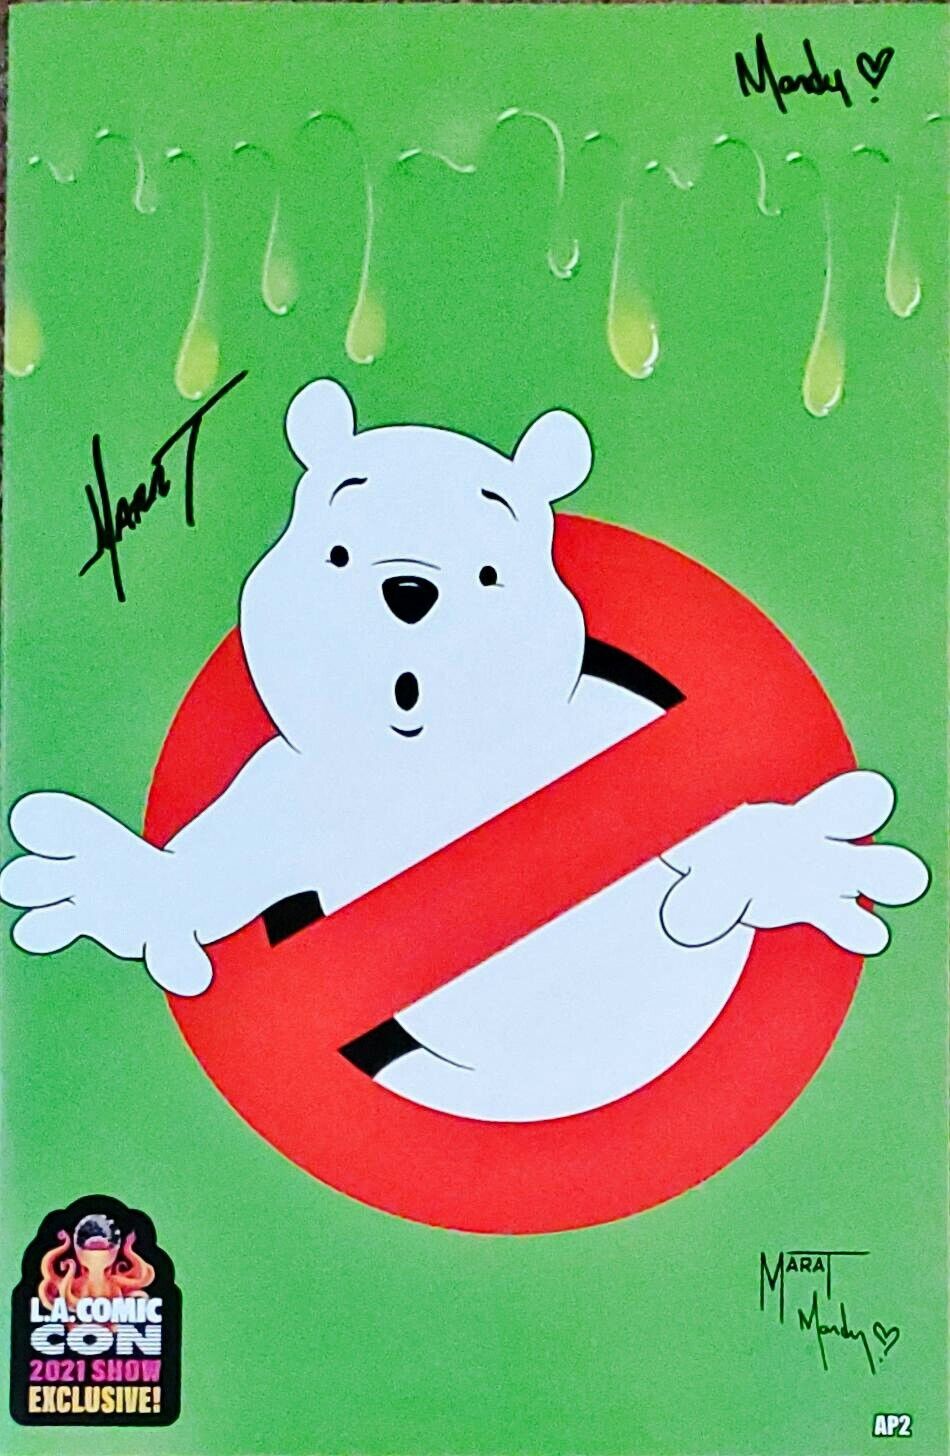 Do You Pooh 2021 LA Comic CON Exclusive AP2 GhostBusters Variant 2x Signed